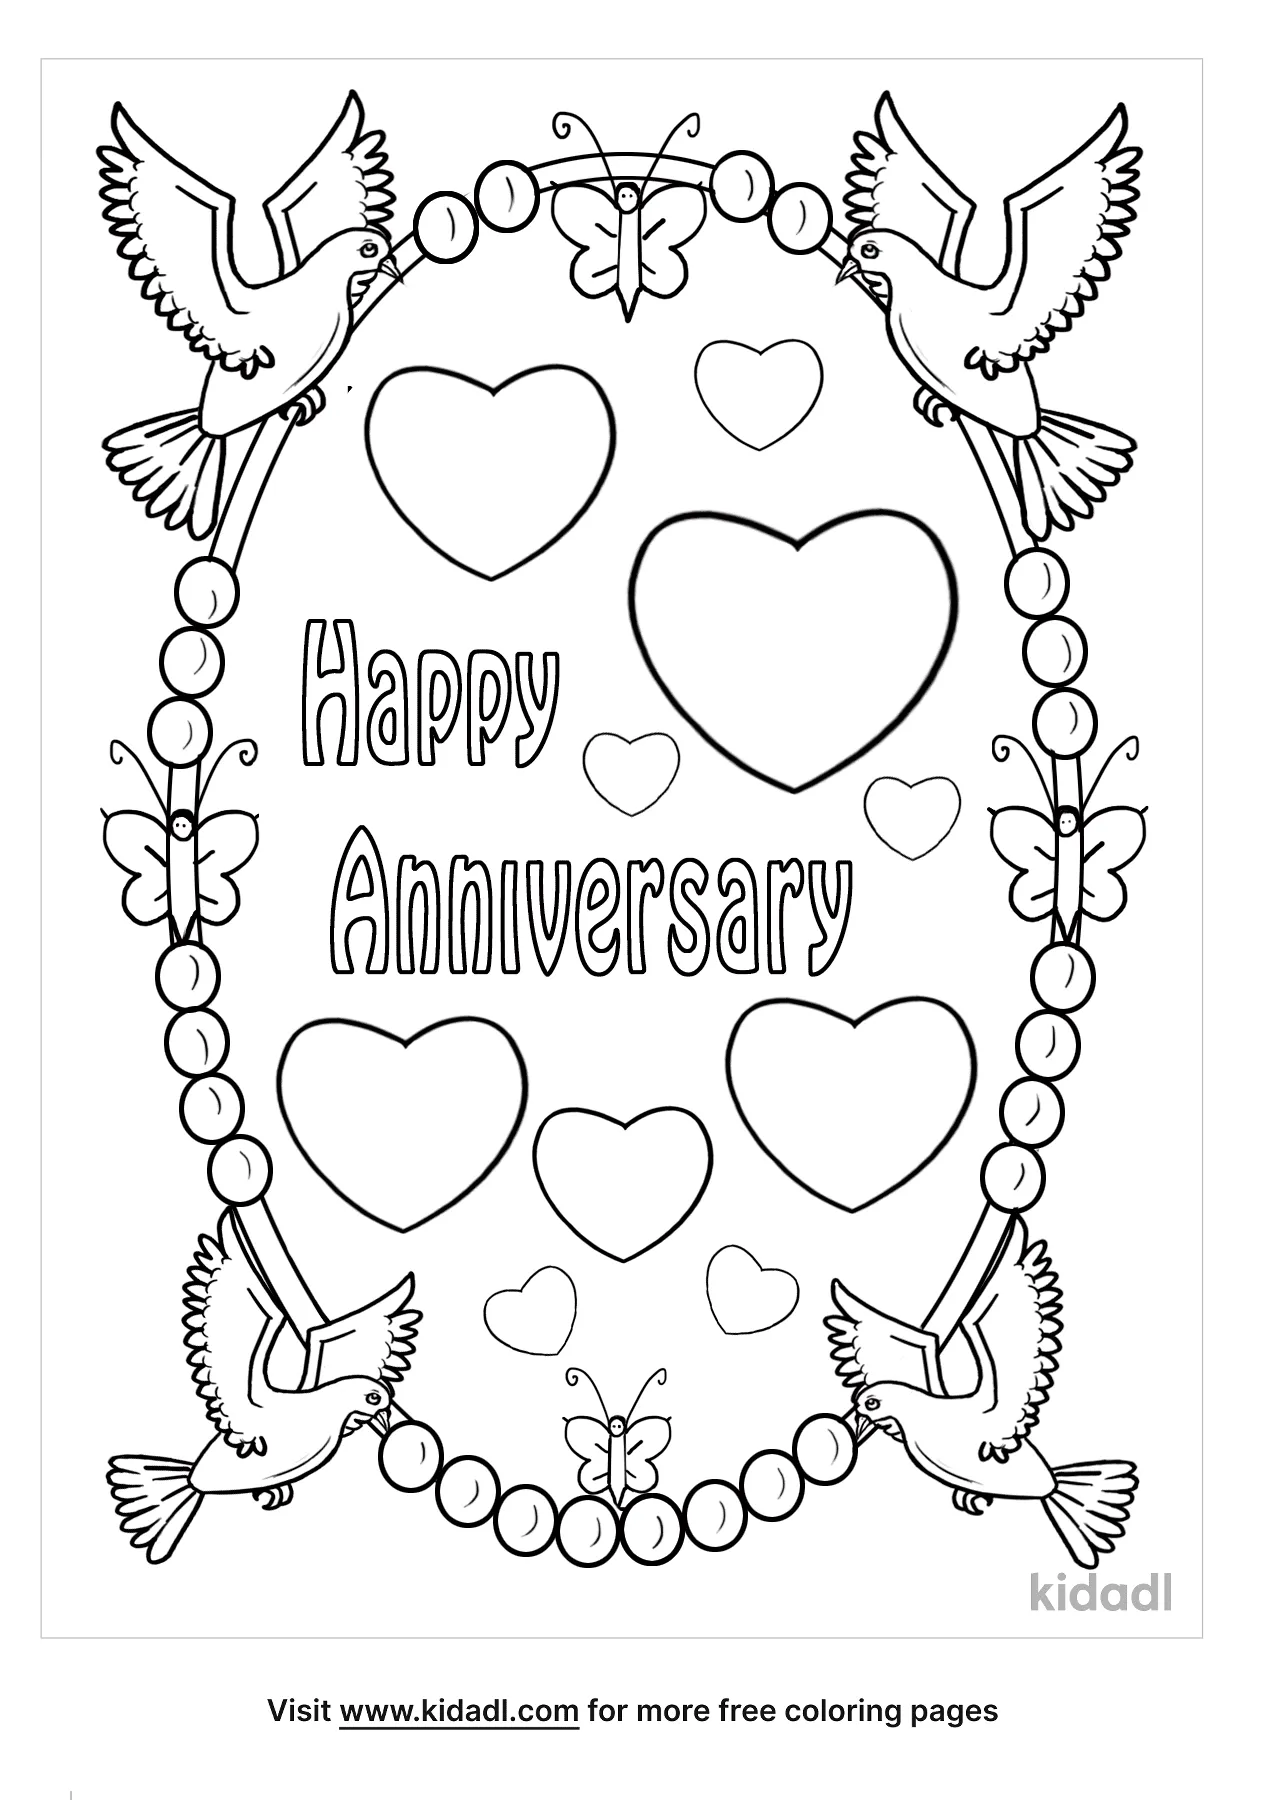 41-clever-pictures-coloring-pages-anniversary-anniversary-57068